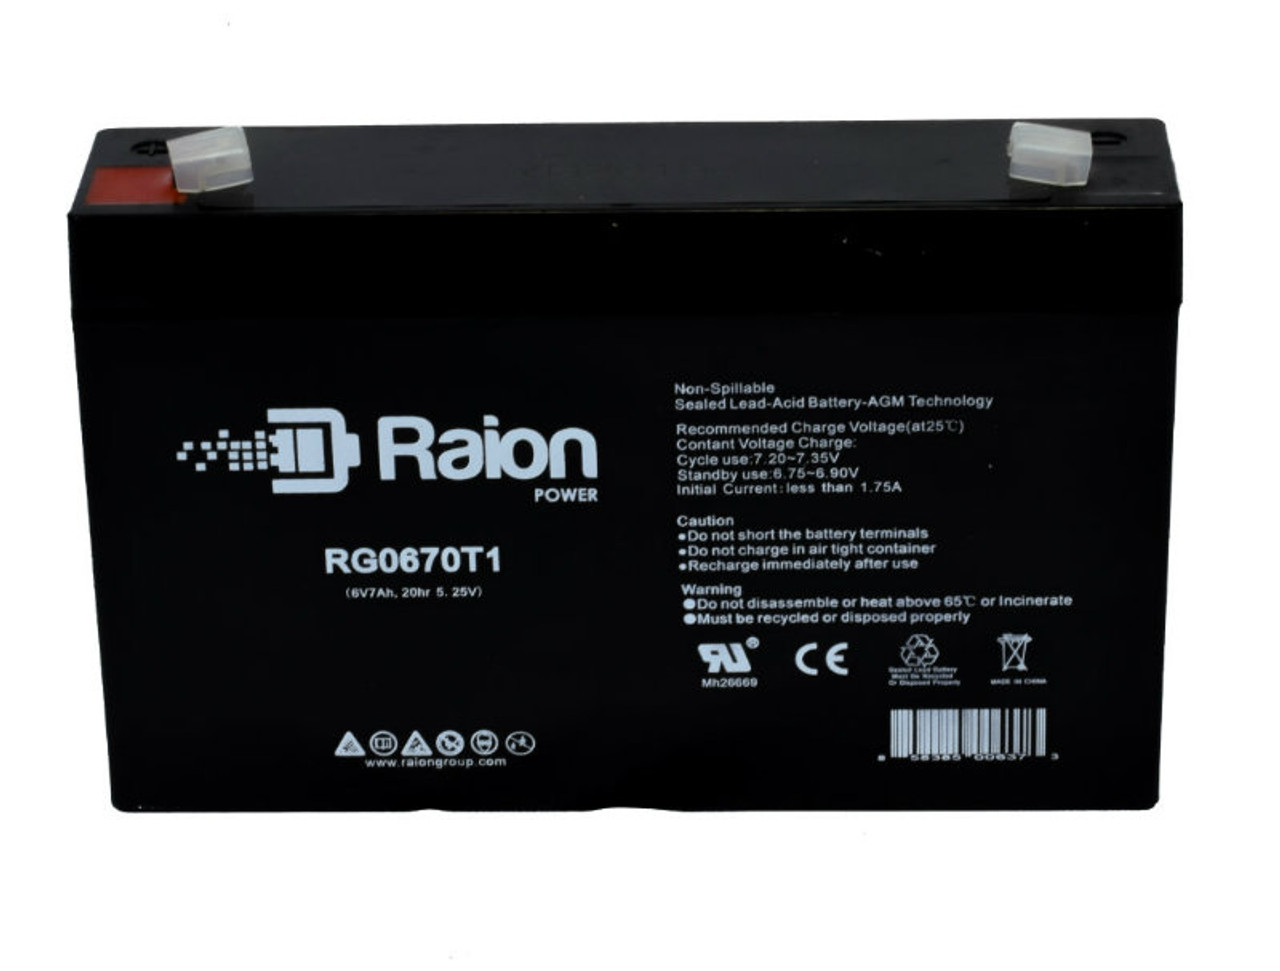 Raion Power RG0670T1 Replacement Battery Cartridge for Kid Motorz 0671 Xtreme Quad Pink